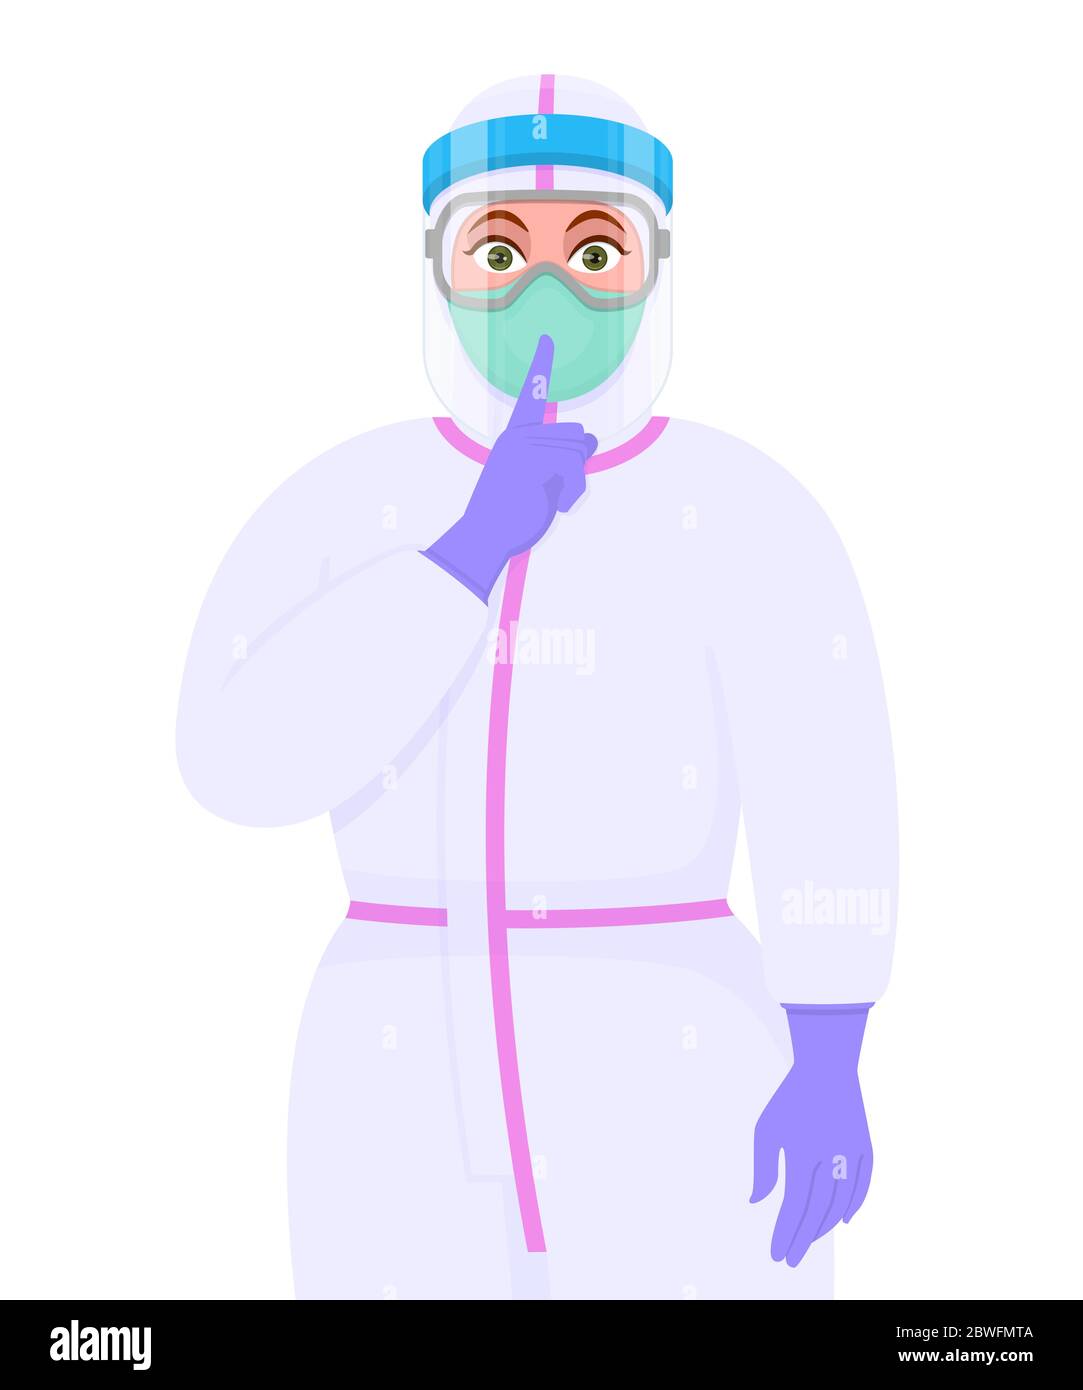 Female doctor in safety protective suit, mask and face shield showing finger on lips. Physician asking silence hand symbol. Keep quiet! Sh! Corona Stock Vector